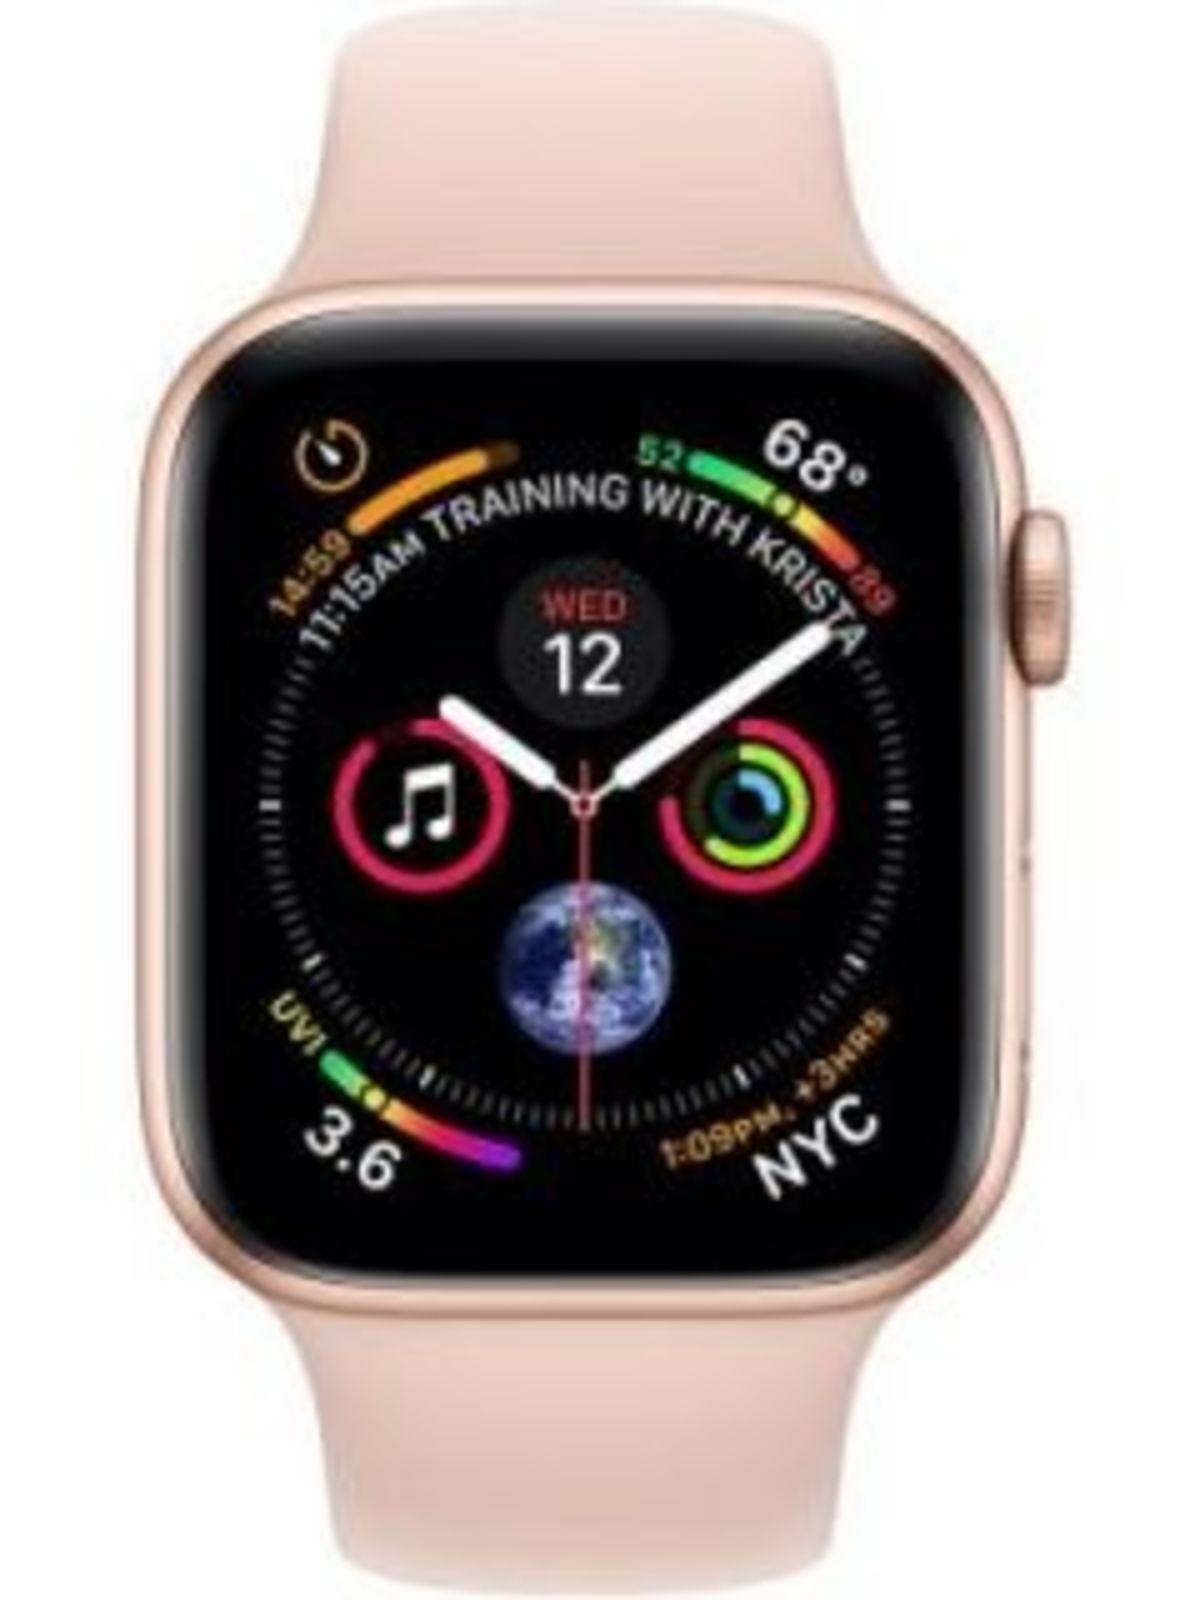 Apple Watch Series 4 Cellular 44mm Price in India, Full Specifications  (15th Sep 2022) at Gadgets Now